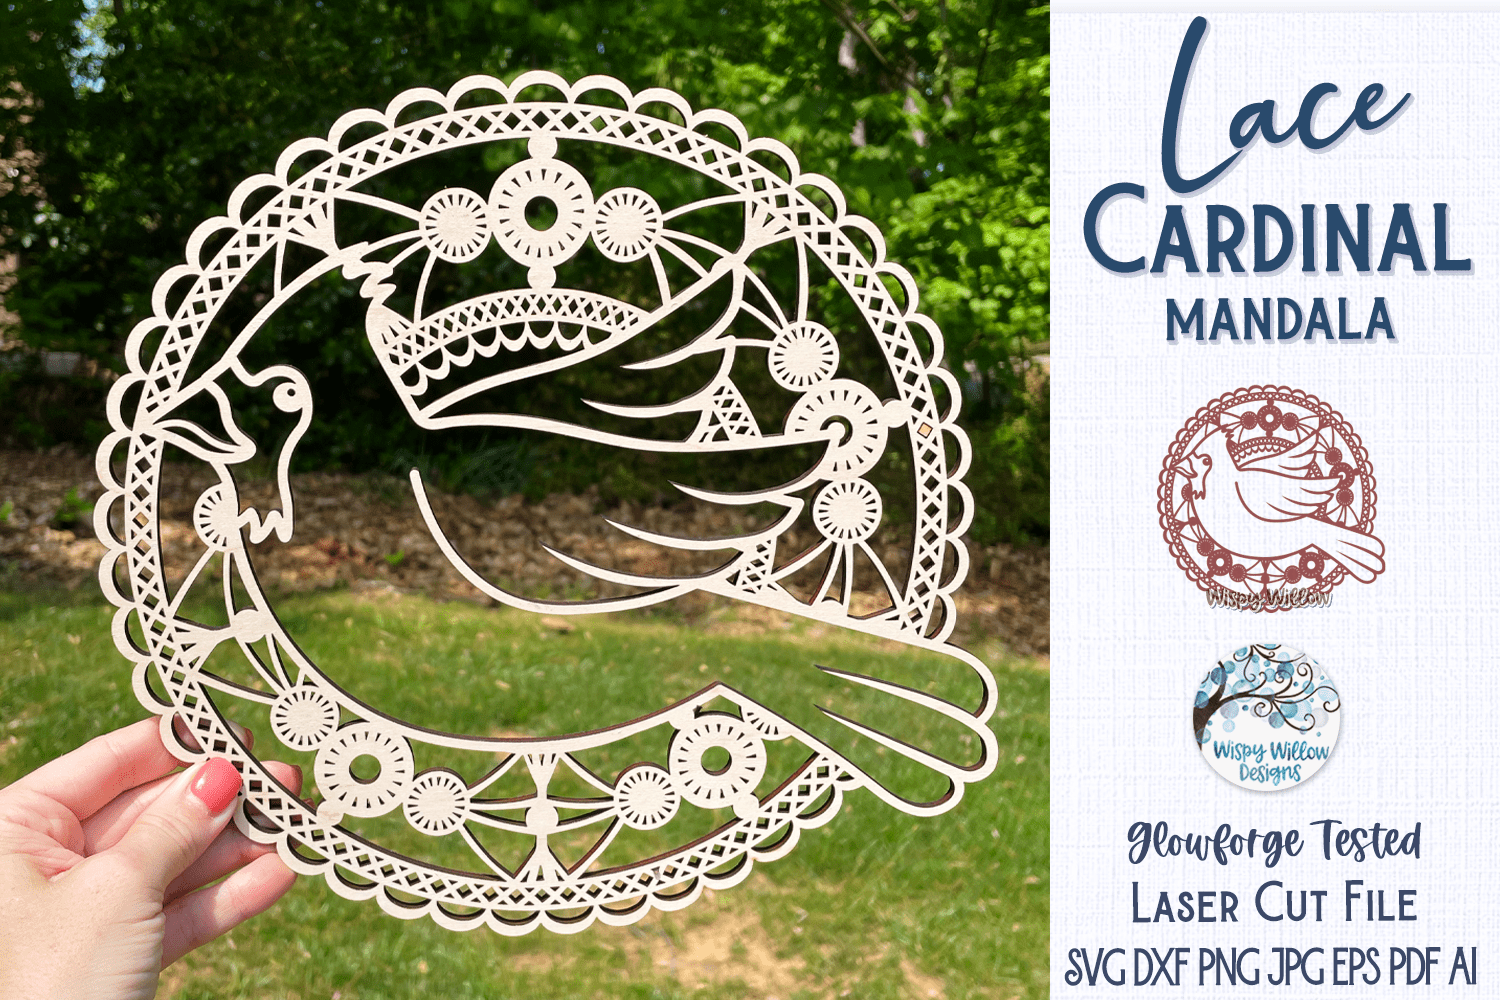 Lace Cardinal Mandala for Laser or Glowforge Wispy Willow Designs Company